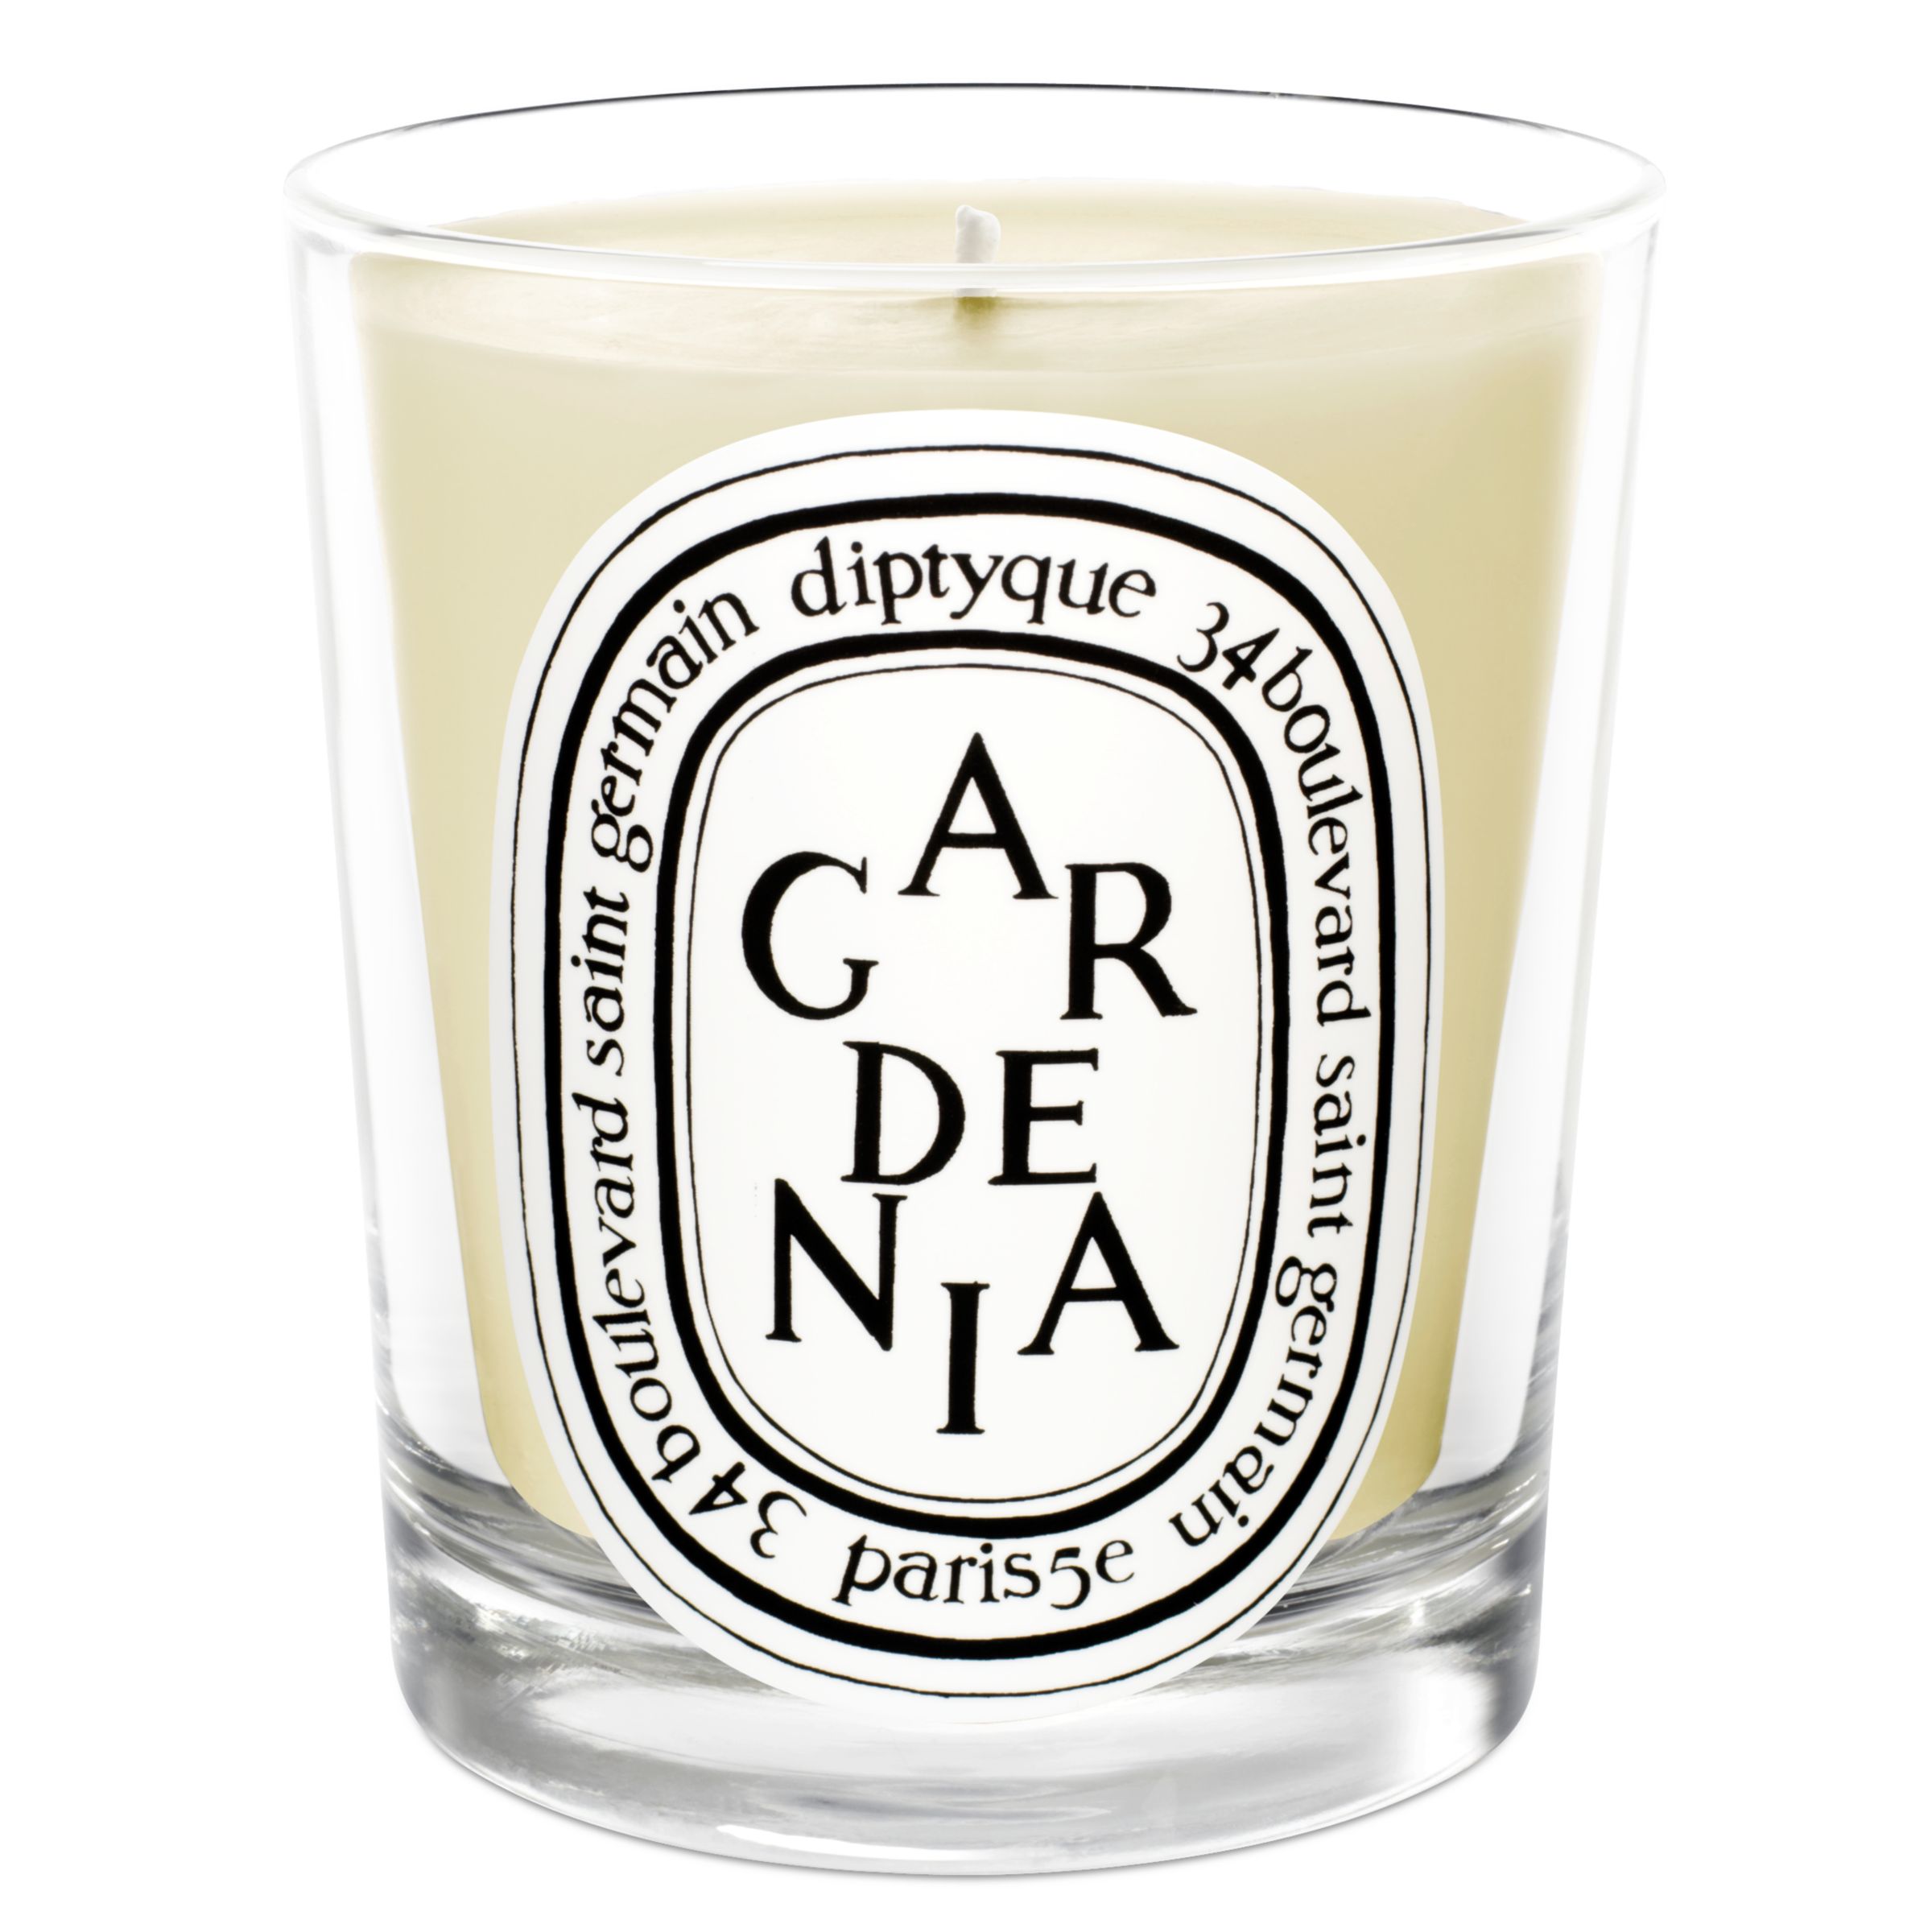 Diptyque Gardenia Scented Candle, 190g 230557292